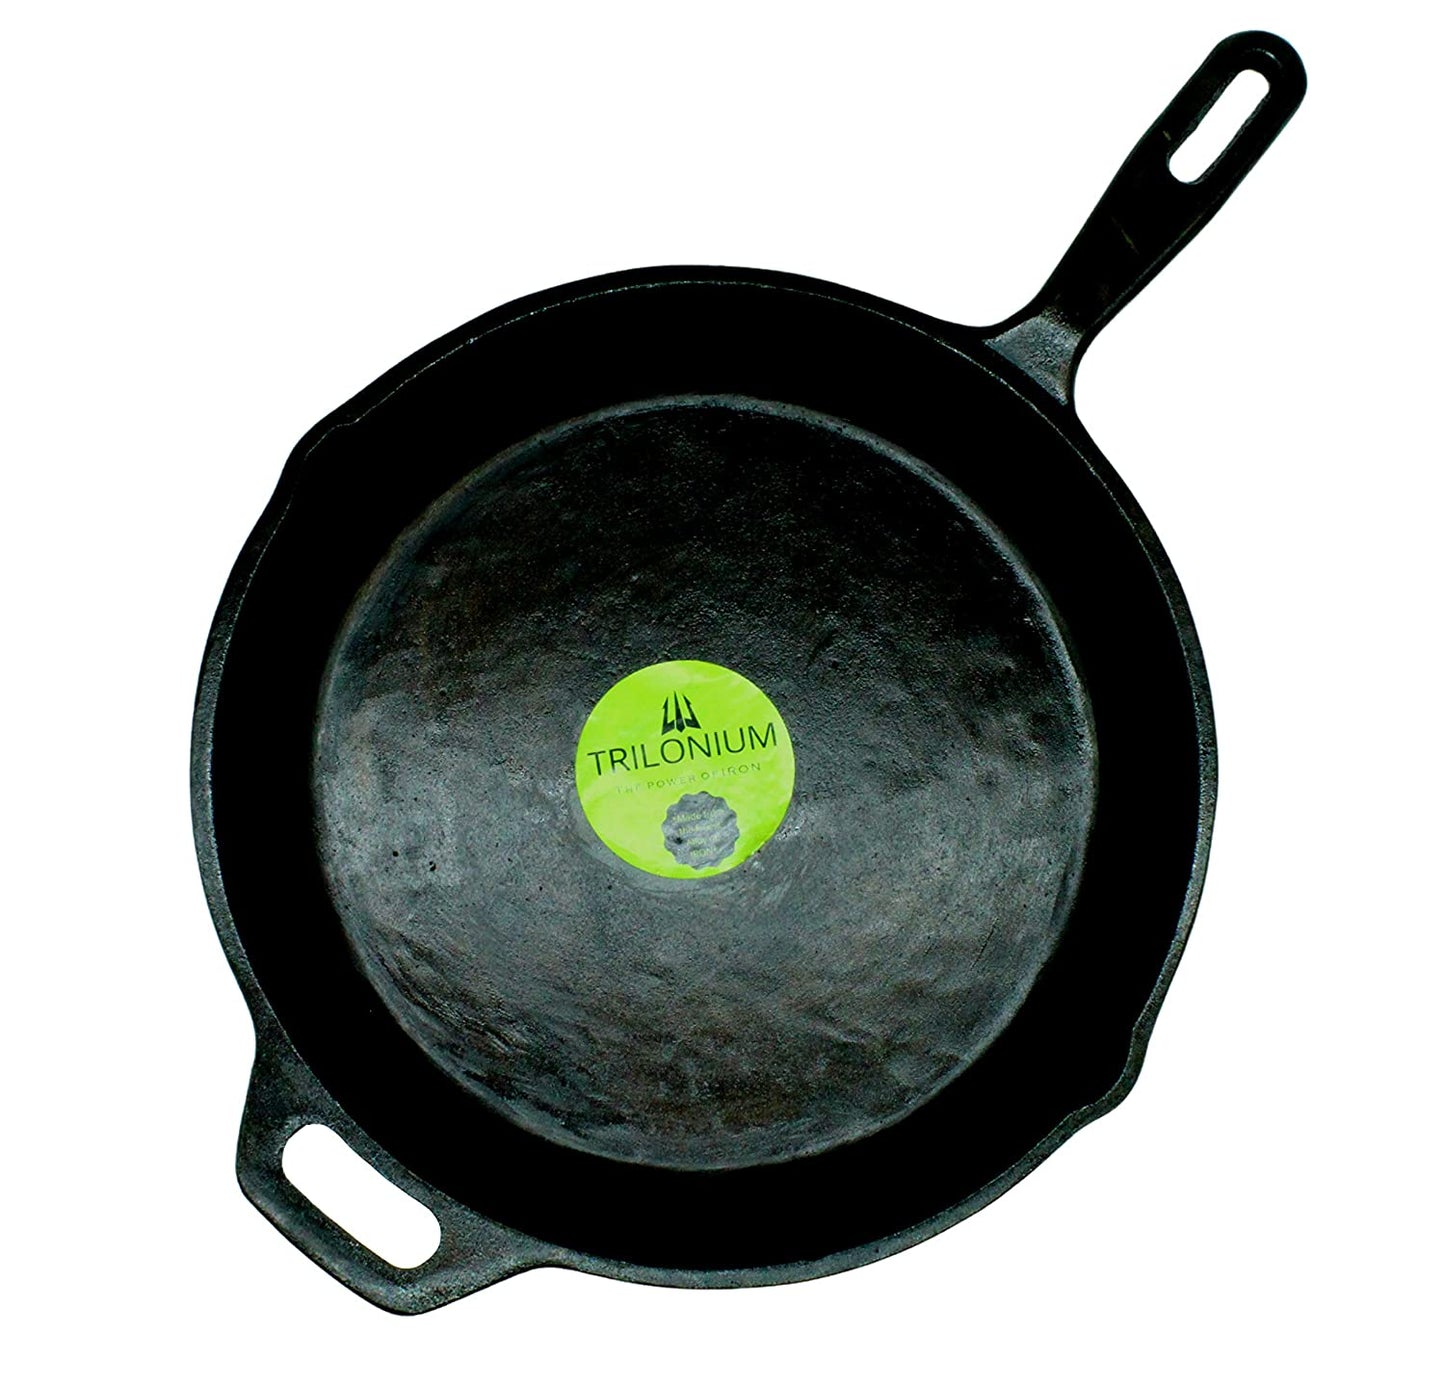 Cast Iron Skillet | Fry Pan With Toughened Glass Lid | Pre-Seasoned | 10 inches | 3.16 KG | Induction Compatible TRILONIUM | Cast Iron Cookware